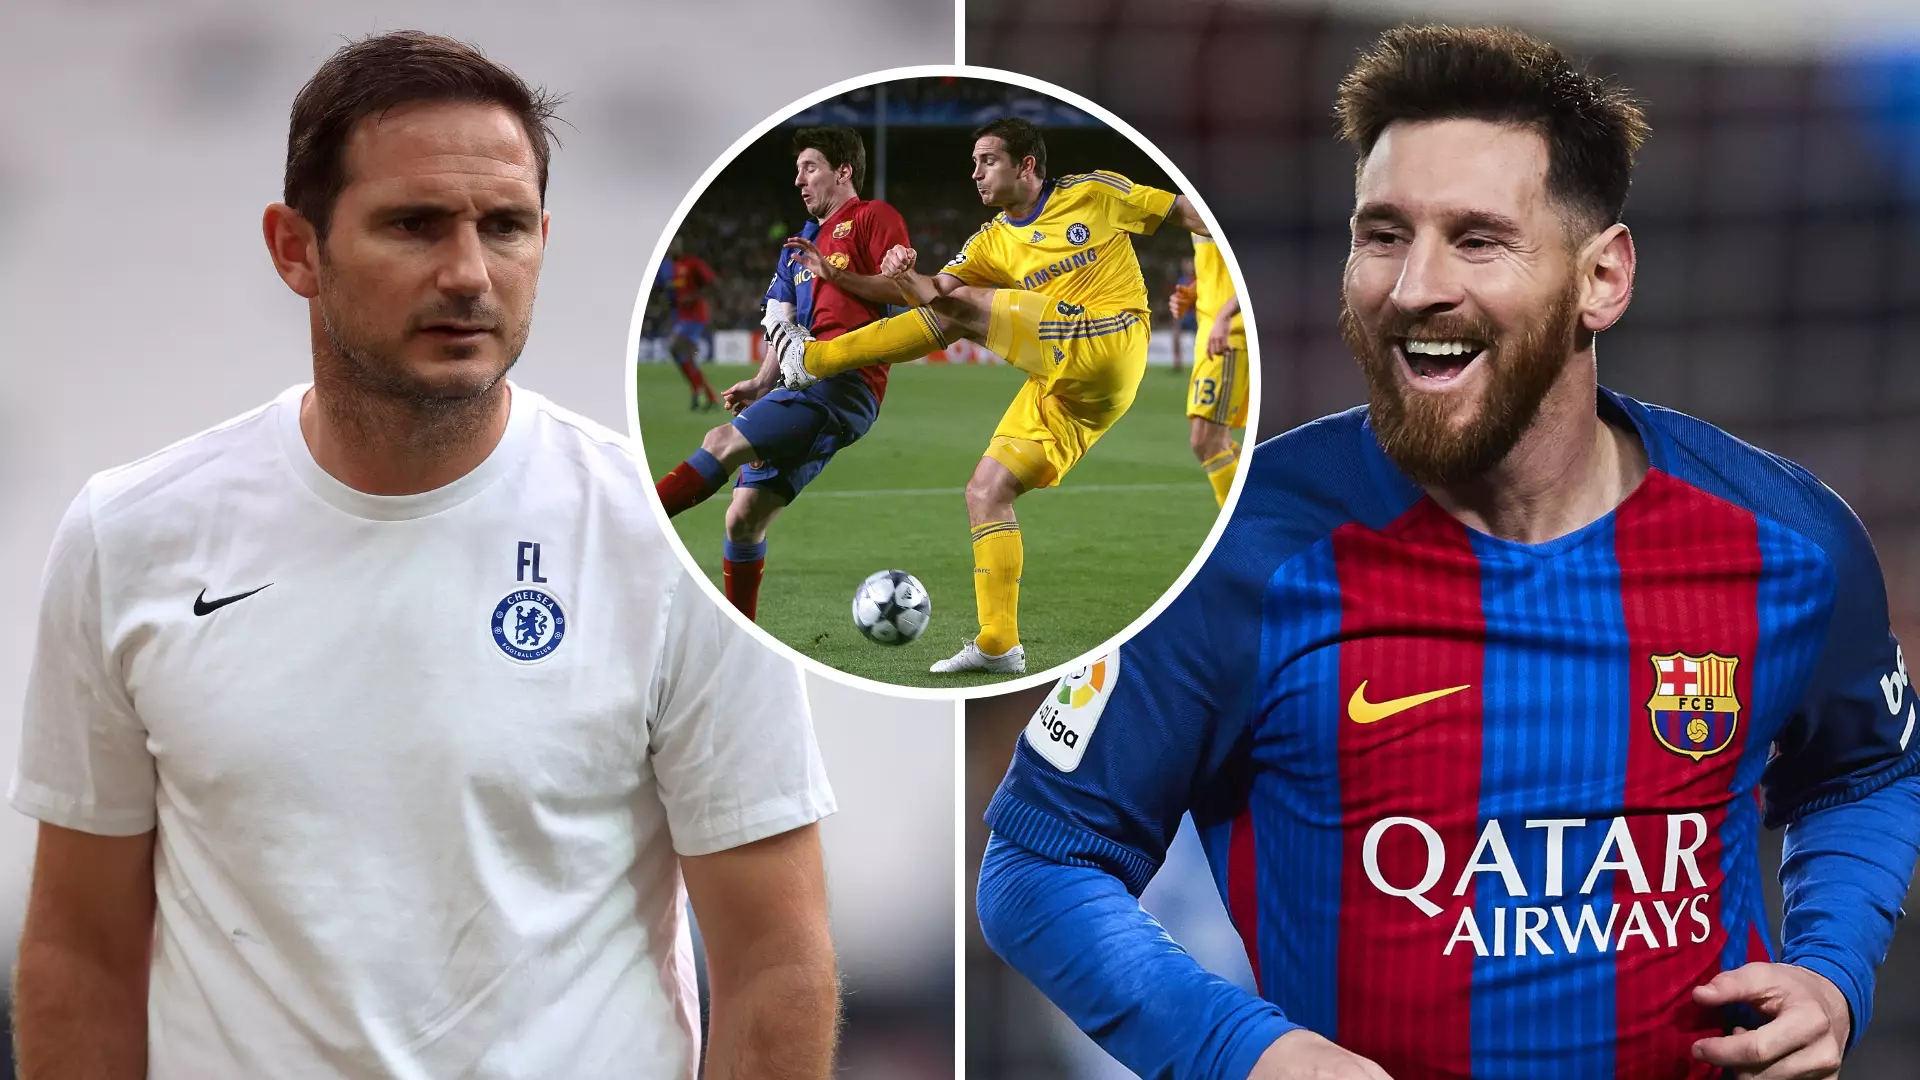 Frank Lampard Names Lionel Messi As The ‘Most Incredible Player’ He Has Played Against